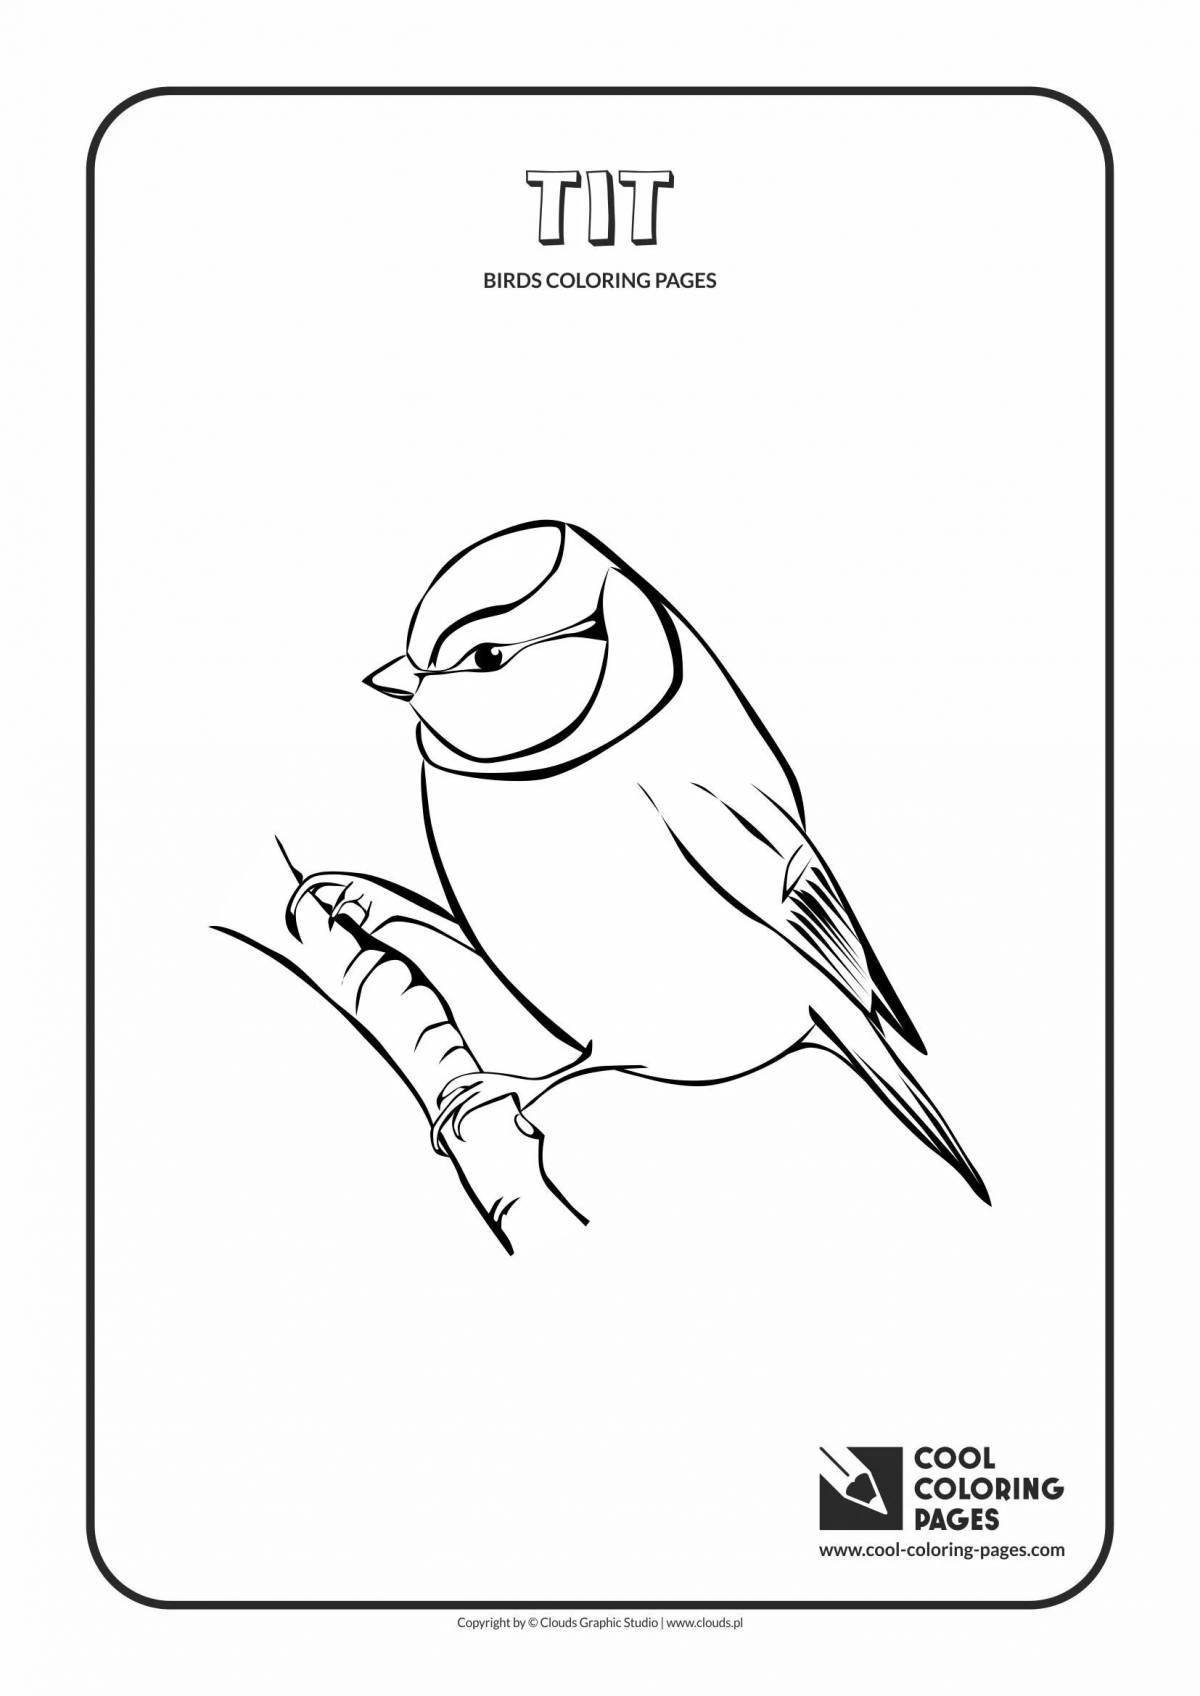 Fun coloring book for little ones